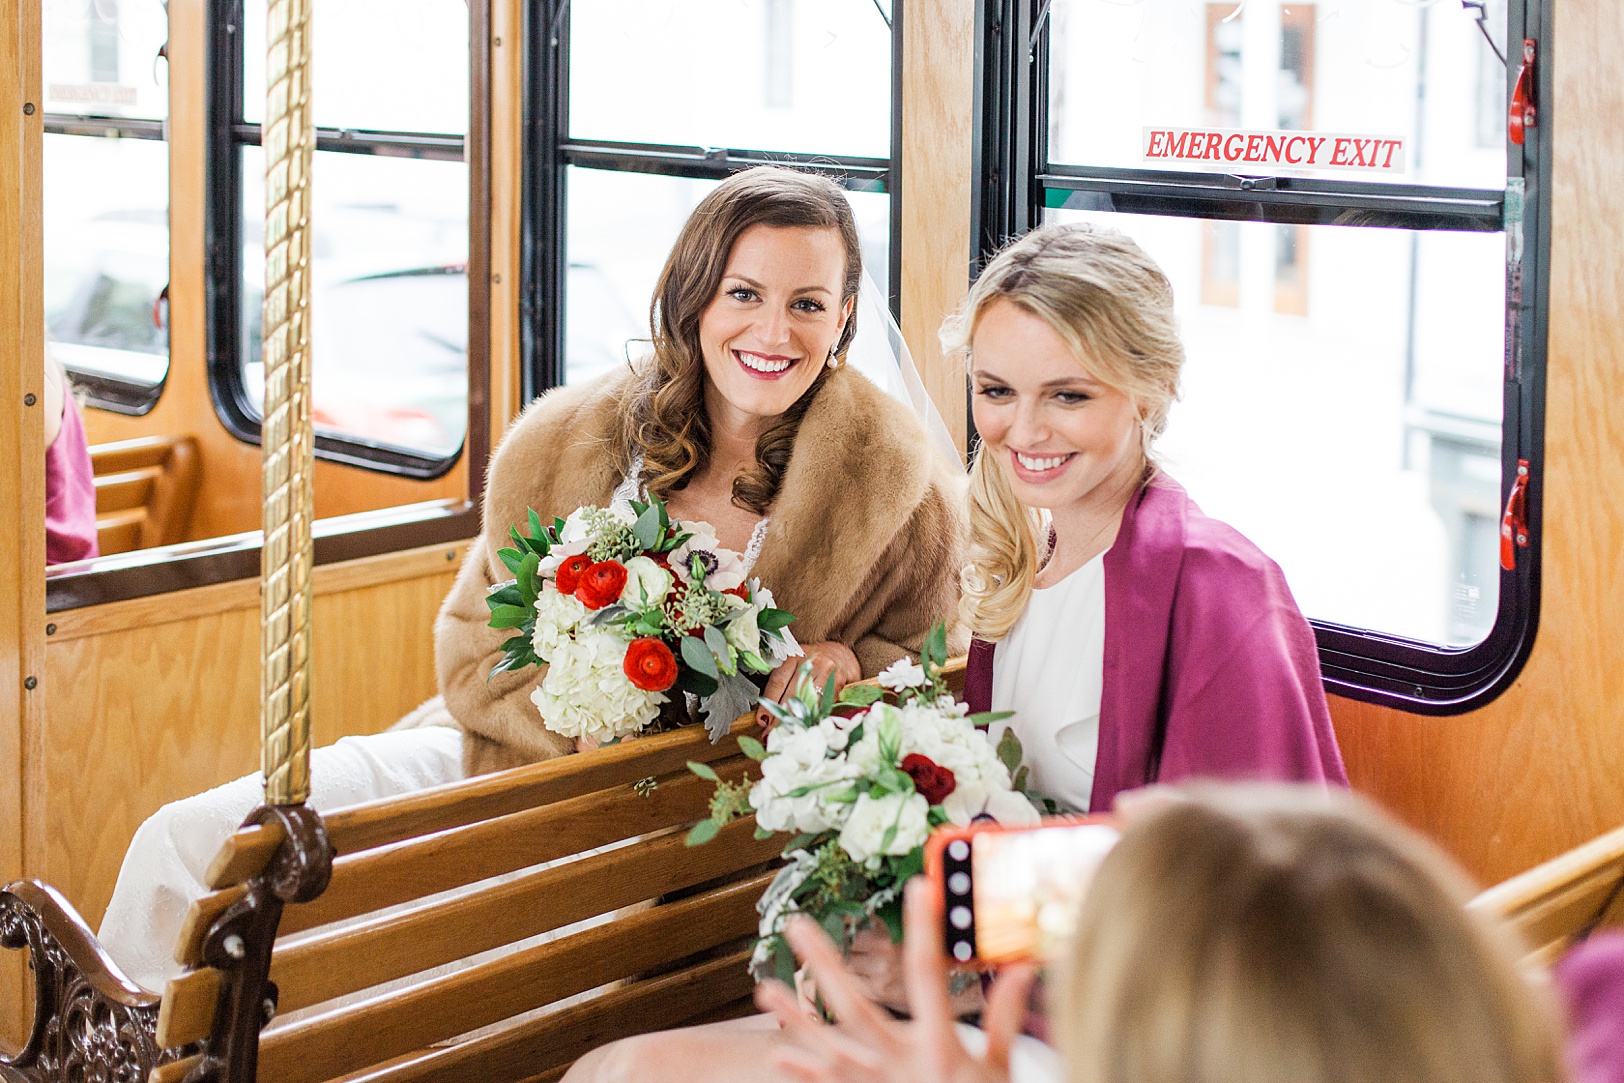 Charleston bride and her friends on the way to wedding on Lowcountry Trolley | Kaitlin Scott Photography